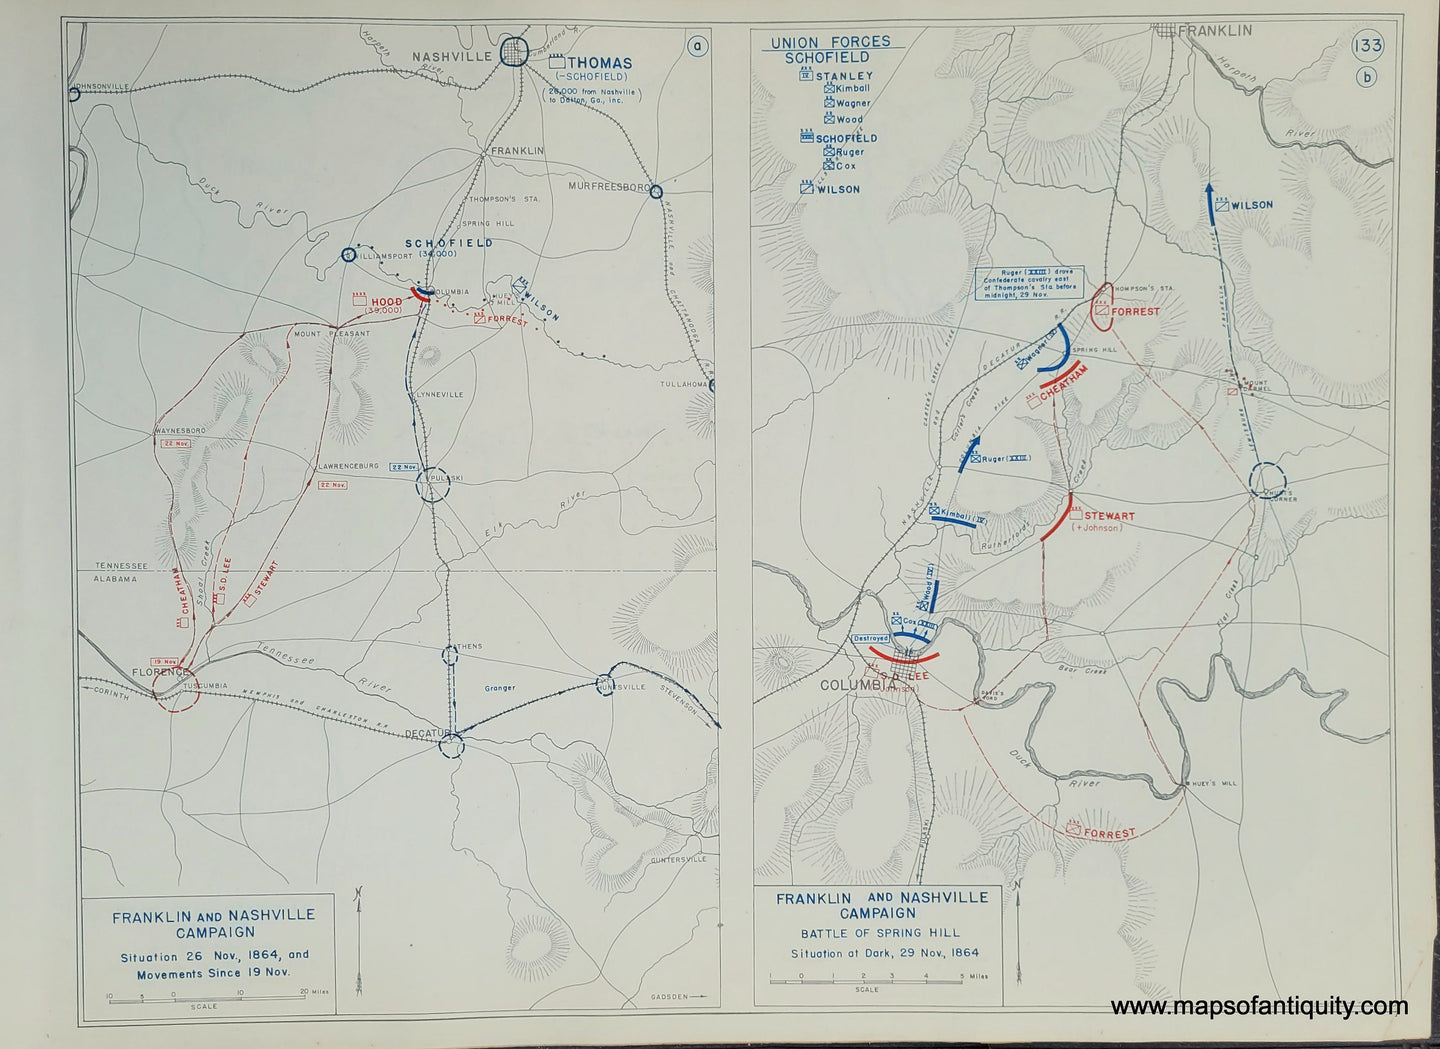 Genuine-Antique-Map-Franklin-and-Nashville-Campaign-Situation-26-Nov--1864-and-Movements-Since-19-Nov--and-Battle-of-Spring-Hill-Situation-at-Dark-29-Nov--1864-1948-Matthew-Forney-Steele-Dept-of-Military-Art-and-Engineering-US-Military-Academy-West-Point-Maps-Of-Antiquity